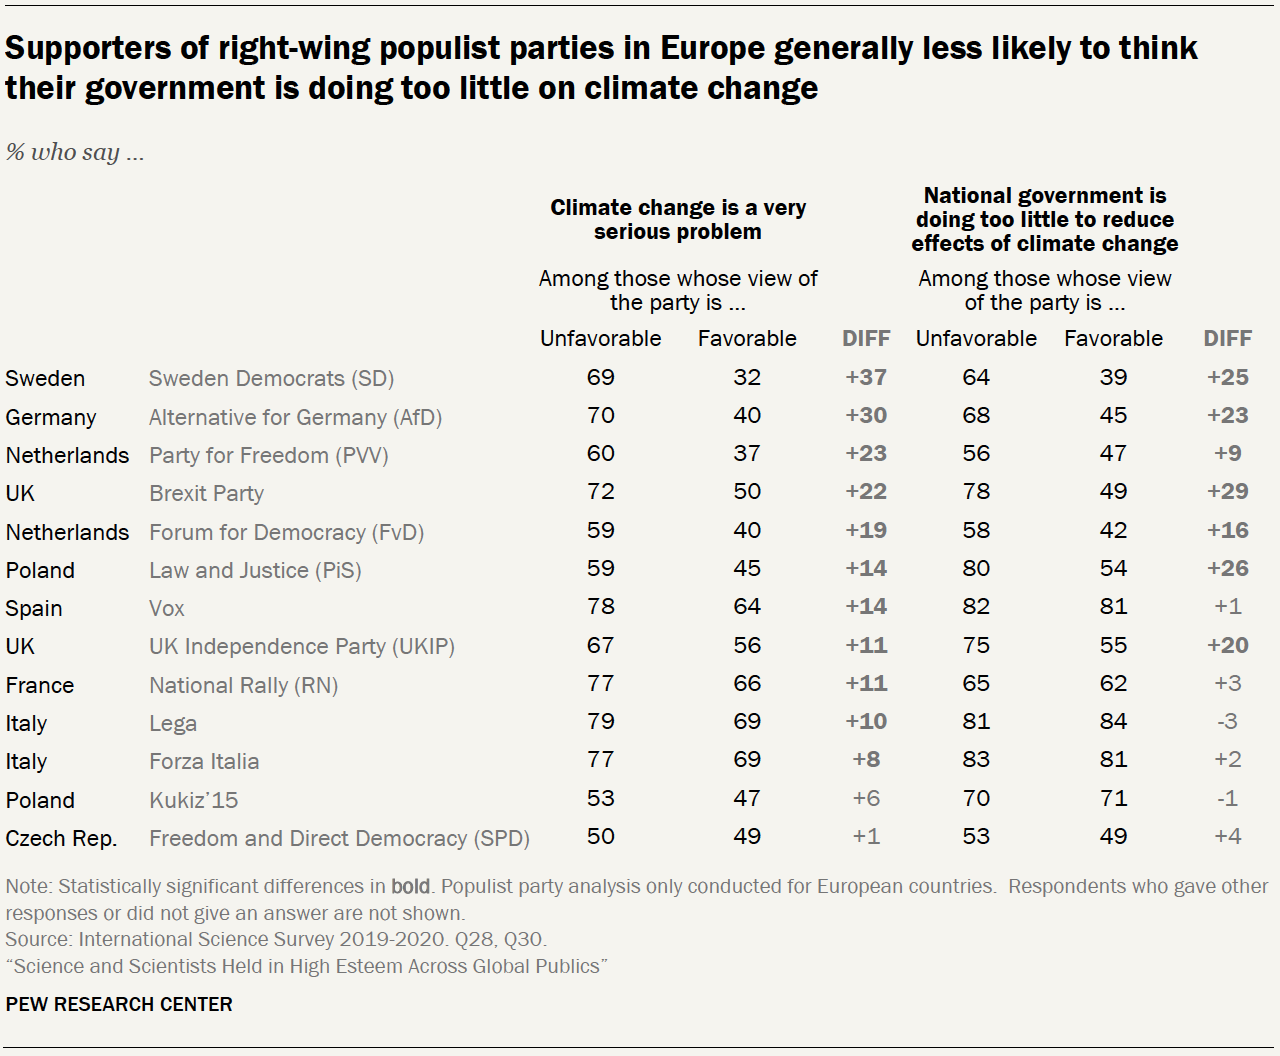 Chart shows supporters of right-wing populist parties in Europe generally less likely to think their government is doing too little on climate change